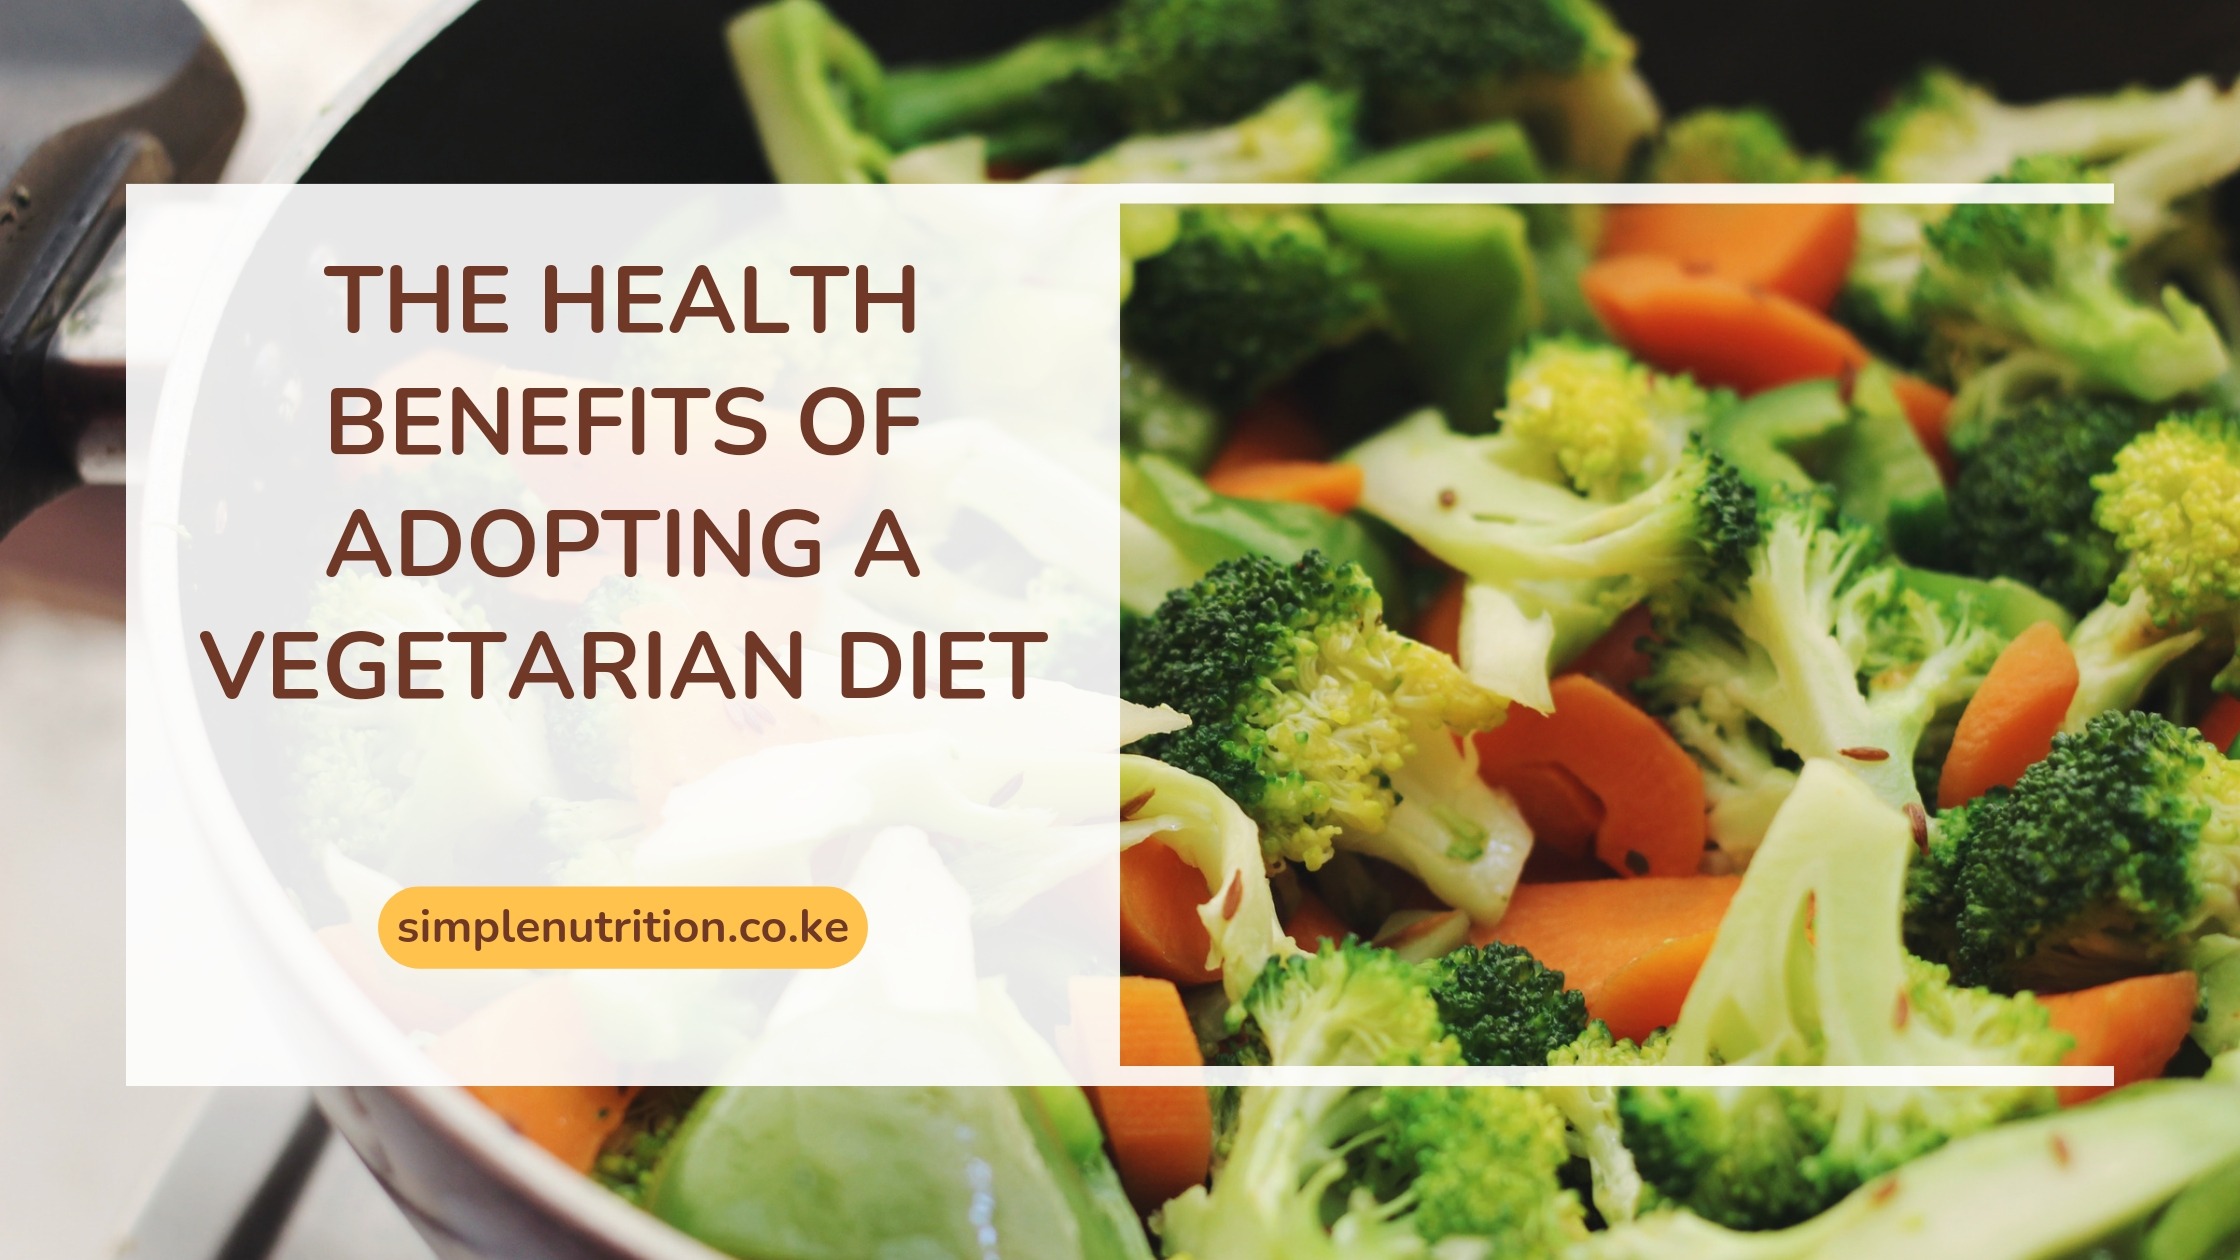 The Health Benefits of Adopting a Vegetarian Diet